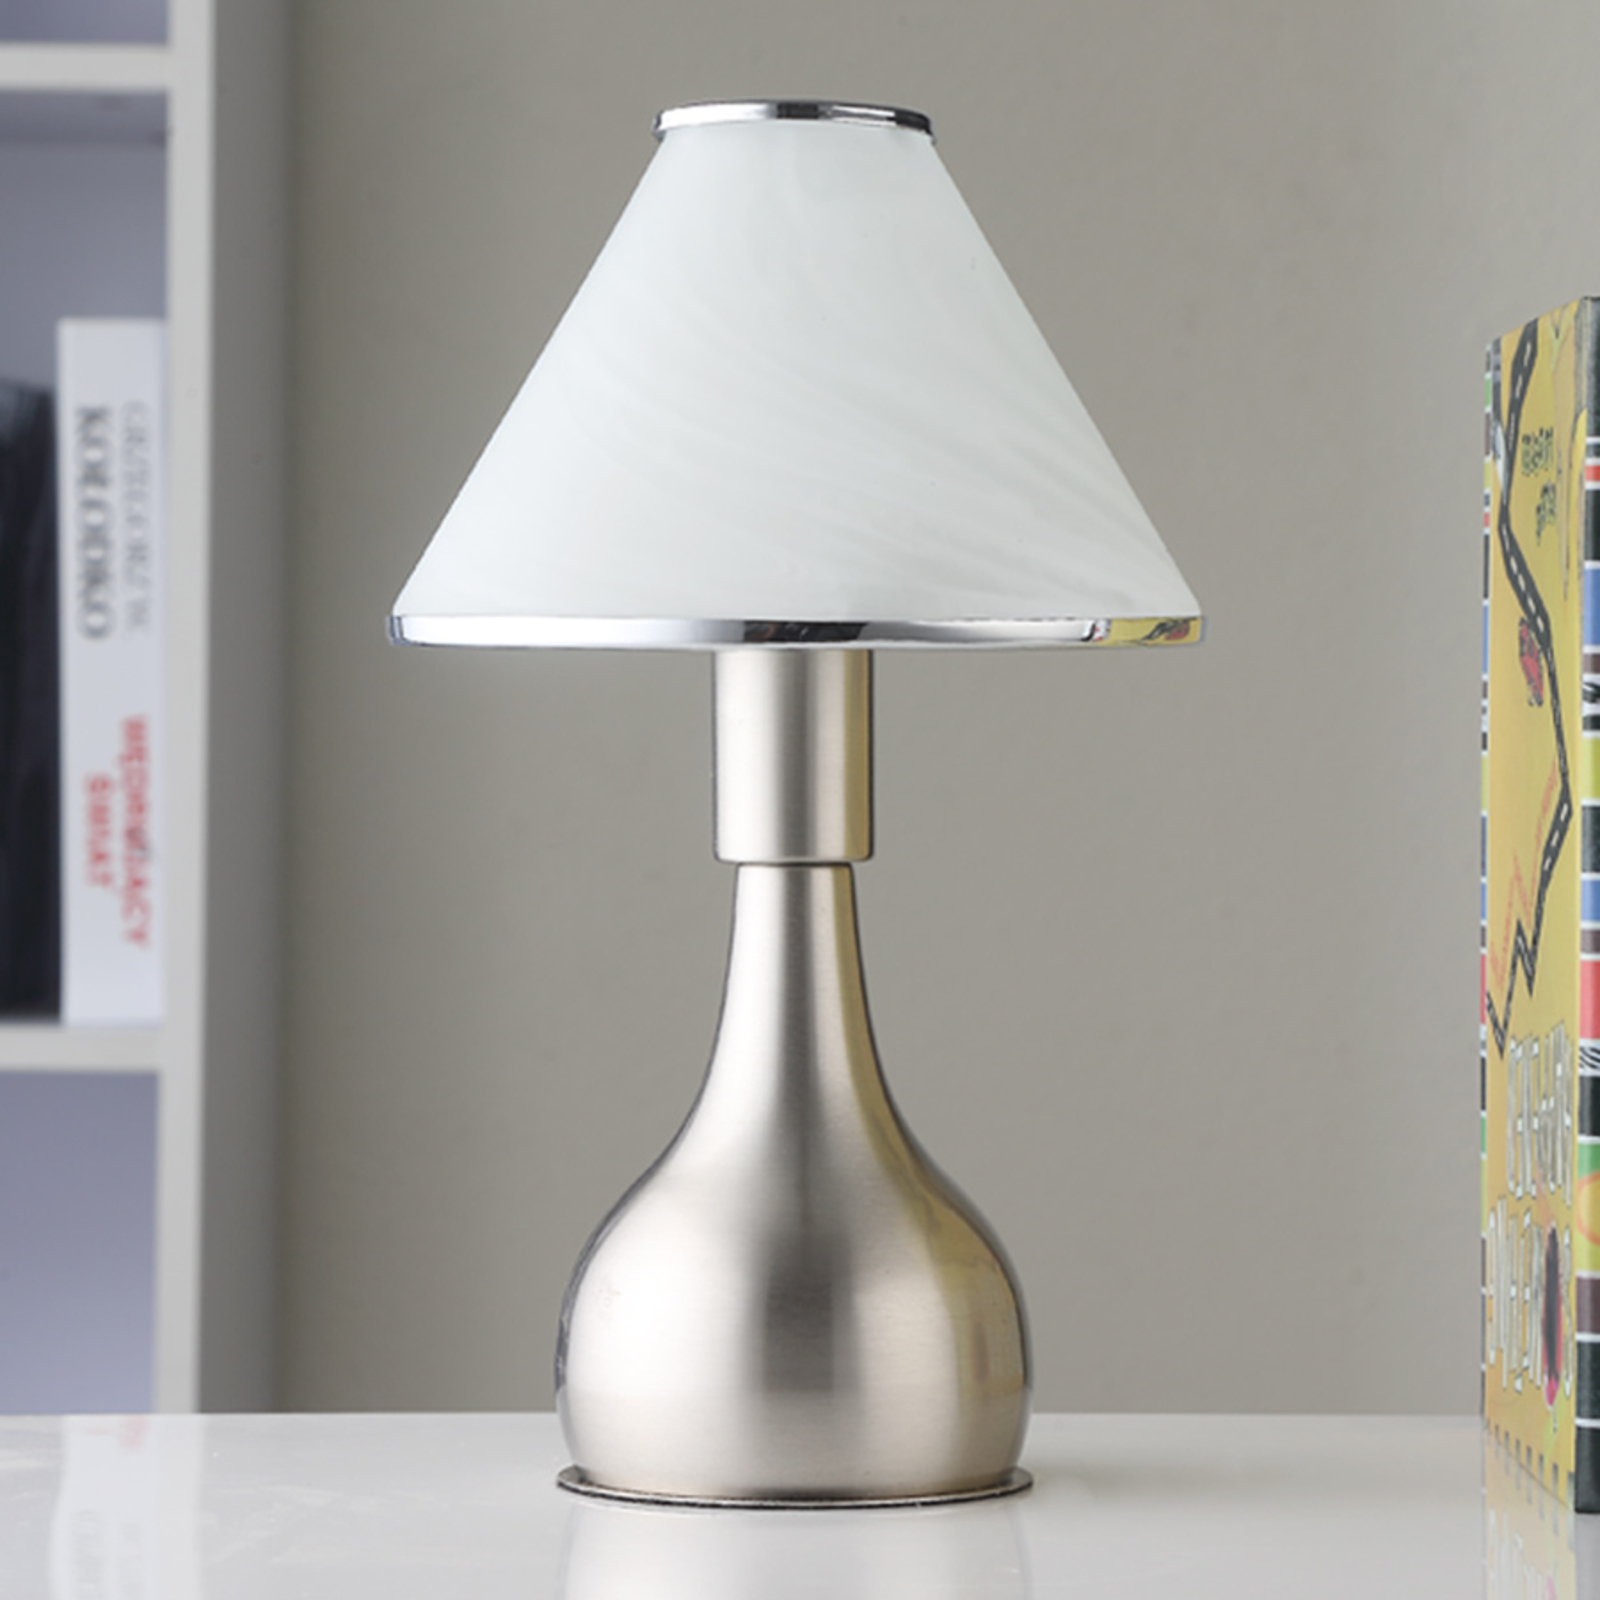 Bedside table lamp Ellen made from glass and metal